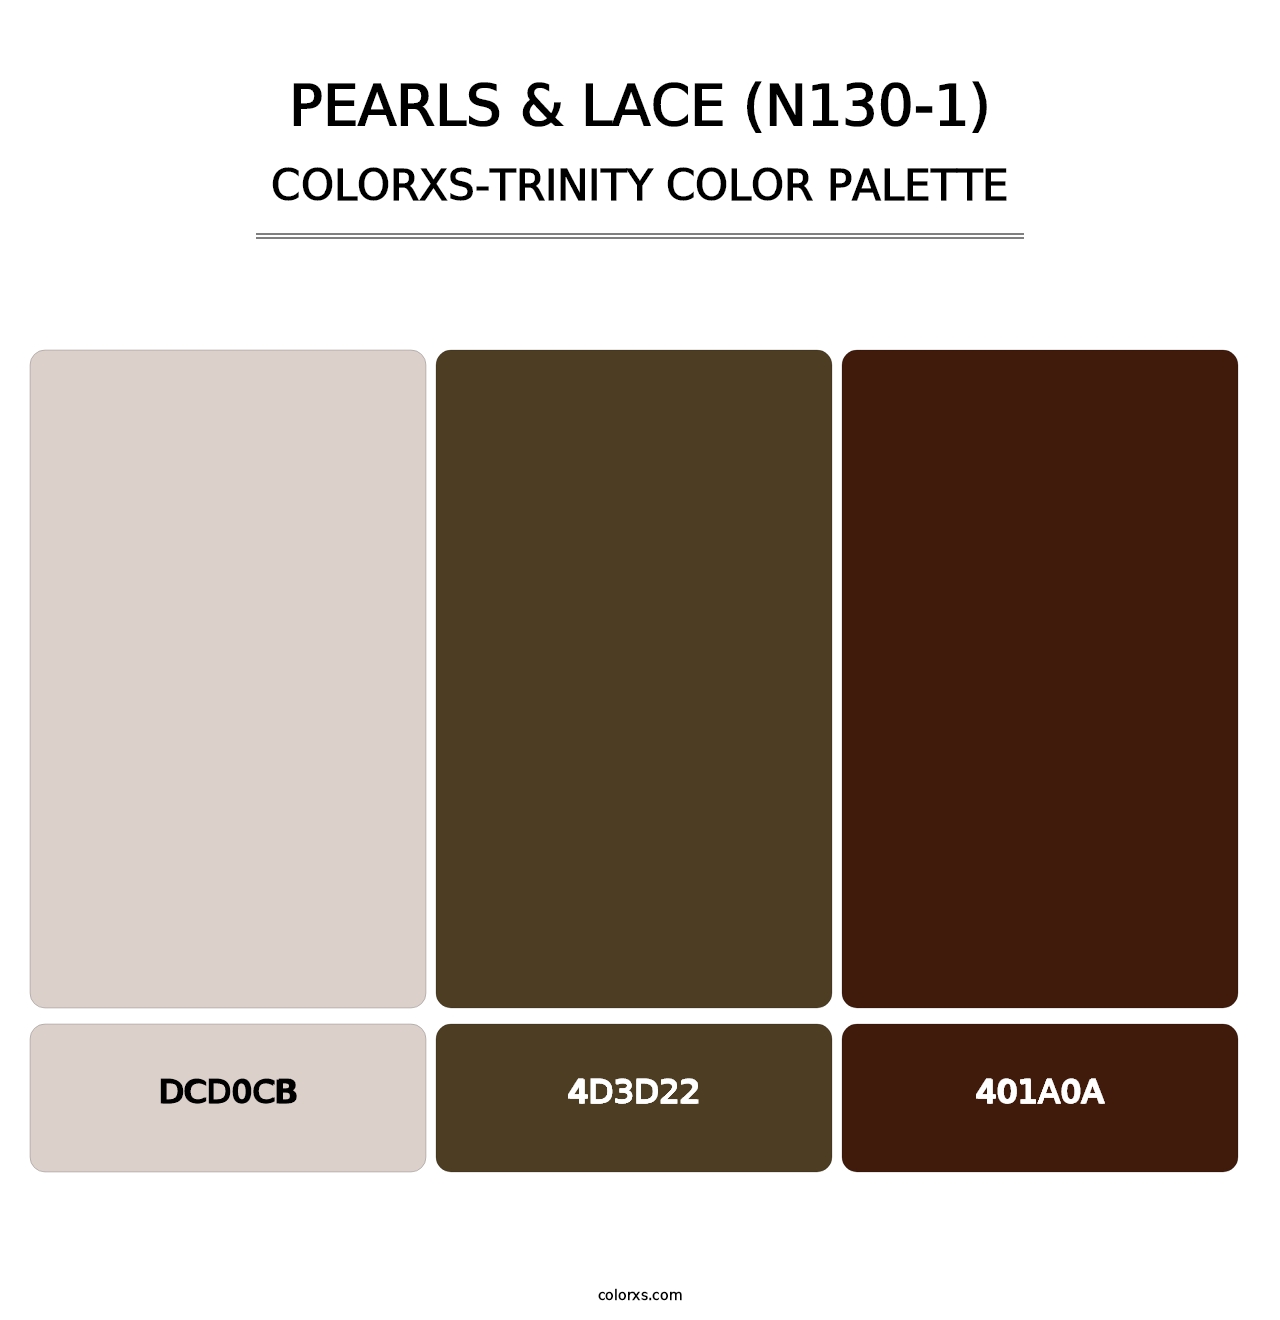 Pearls & Lace (N130-1) - Colorxs Trinity Palette